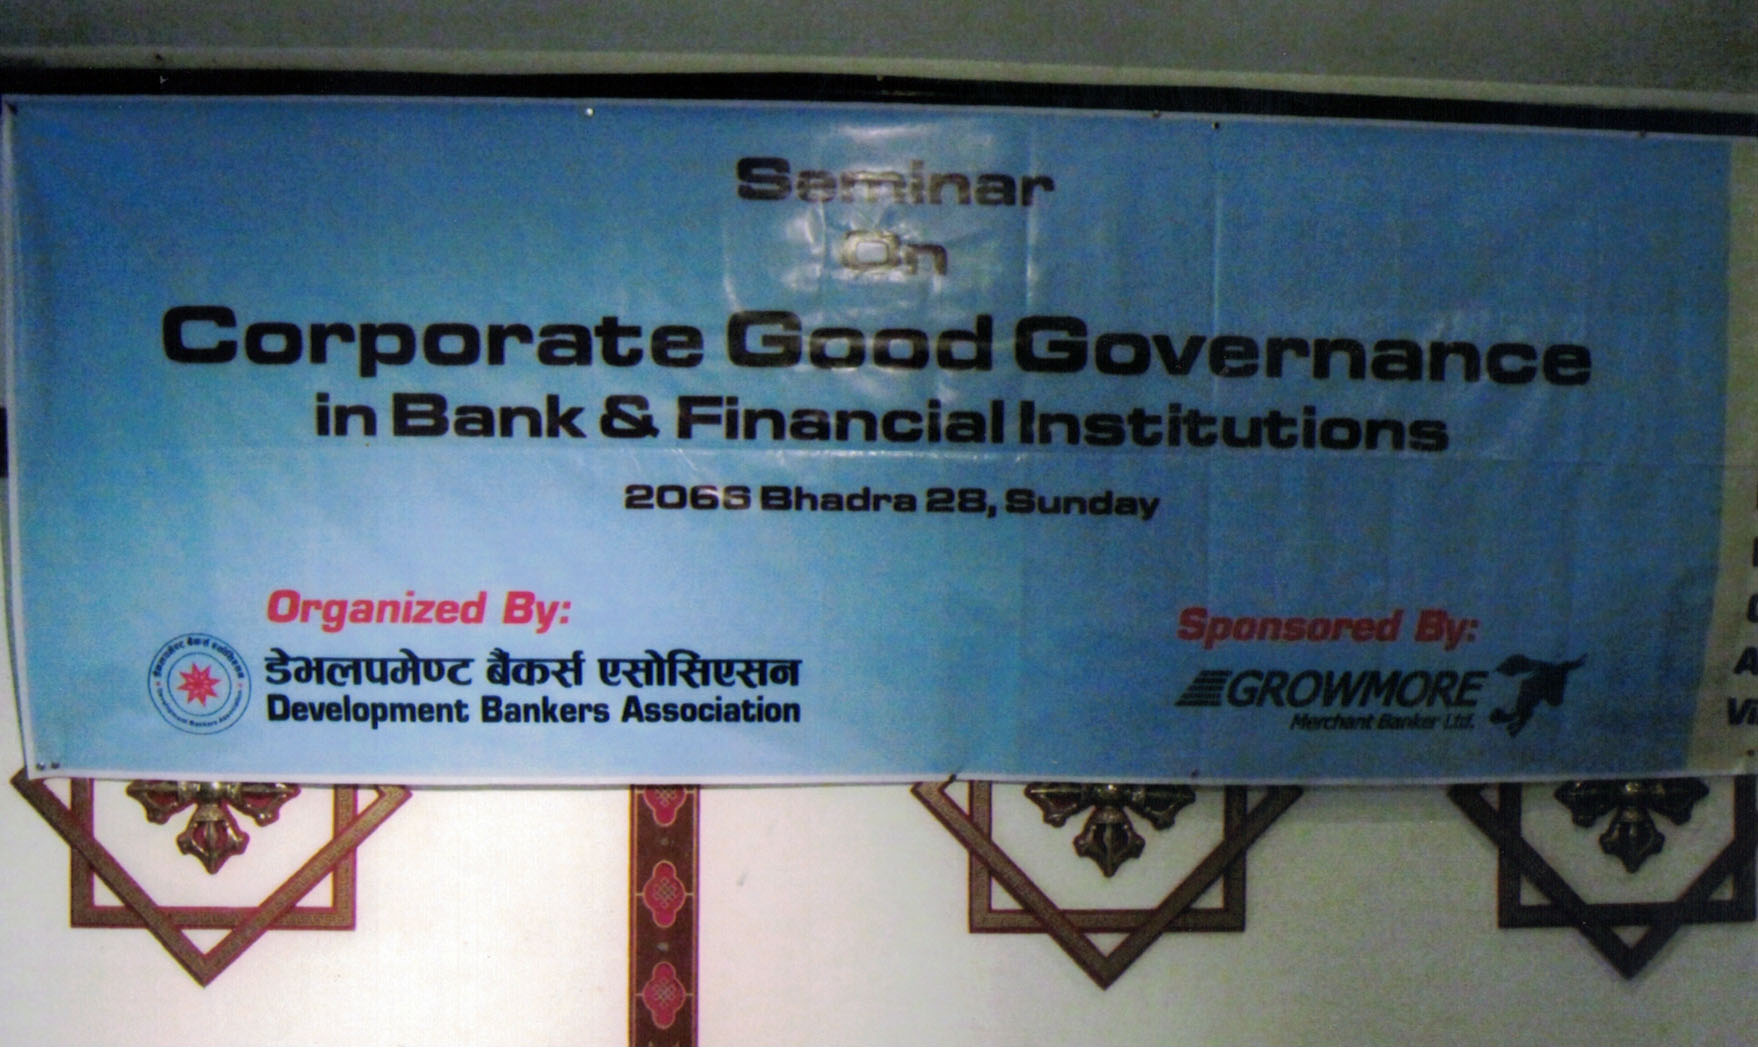 Workshop on Good Corporate Governance in Bank and Financial Institutions (2066.05.28)